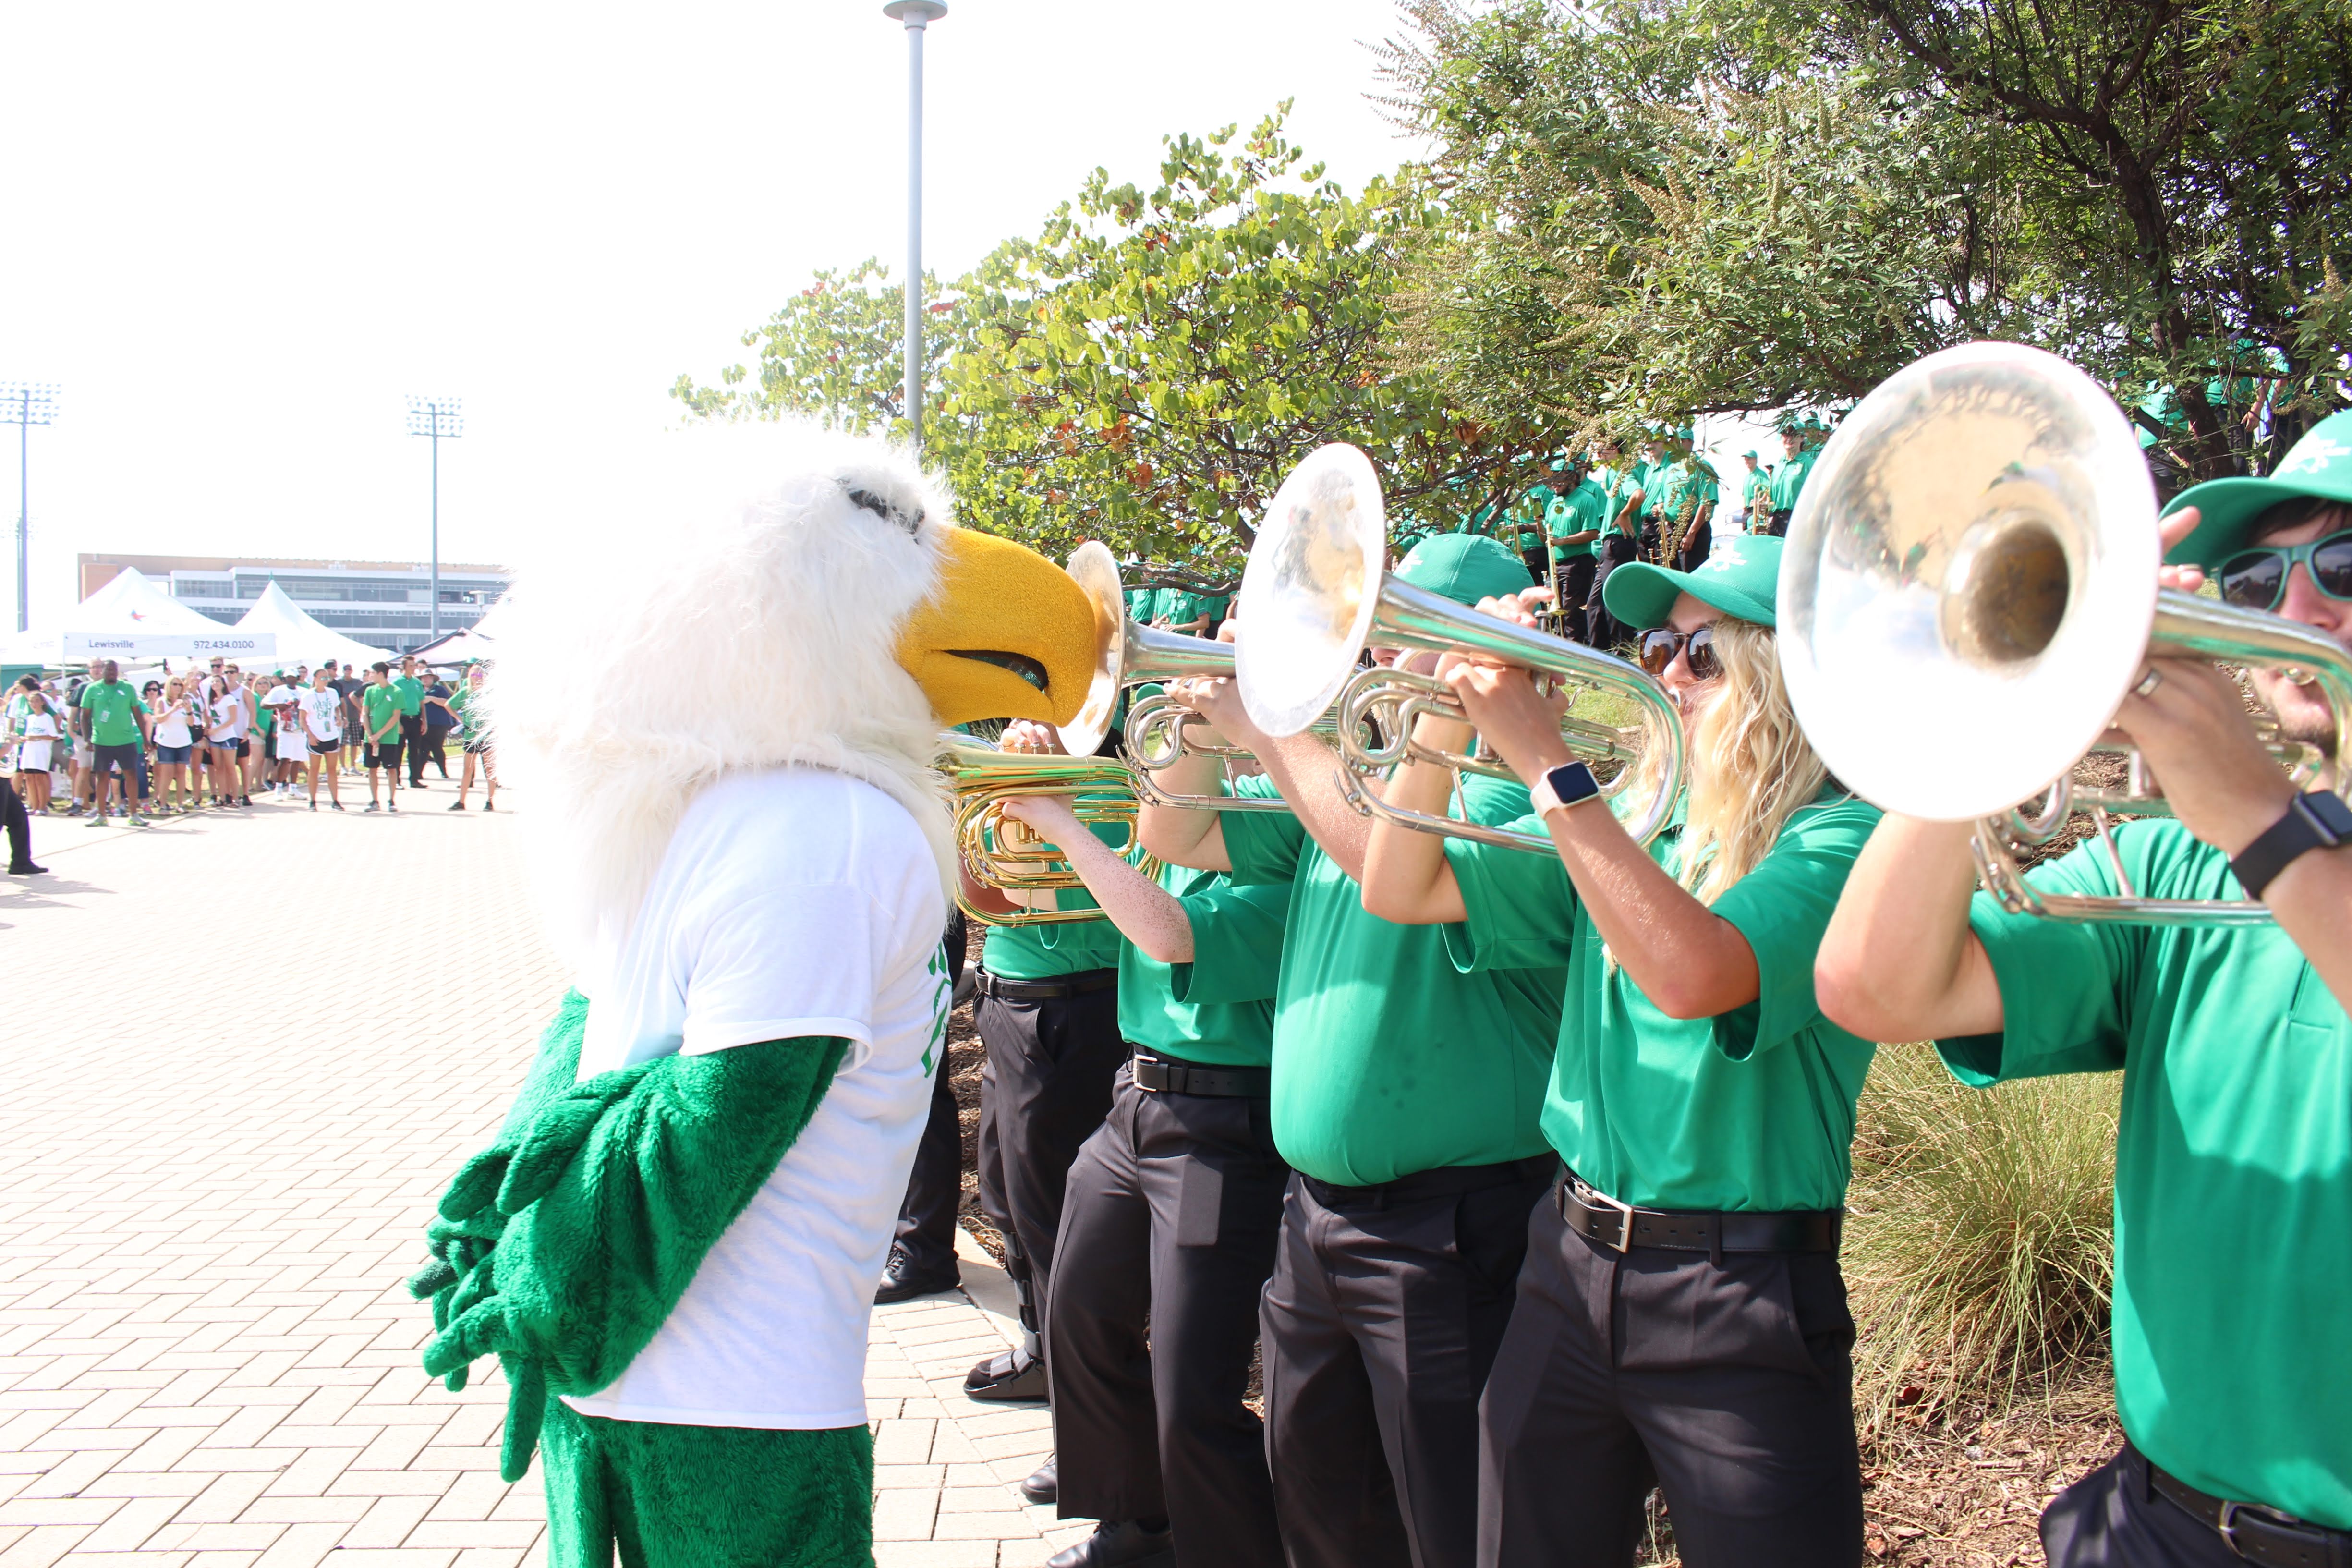 Sights & Sounds :: The Marching 100